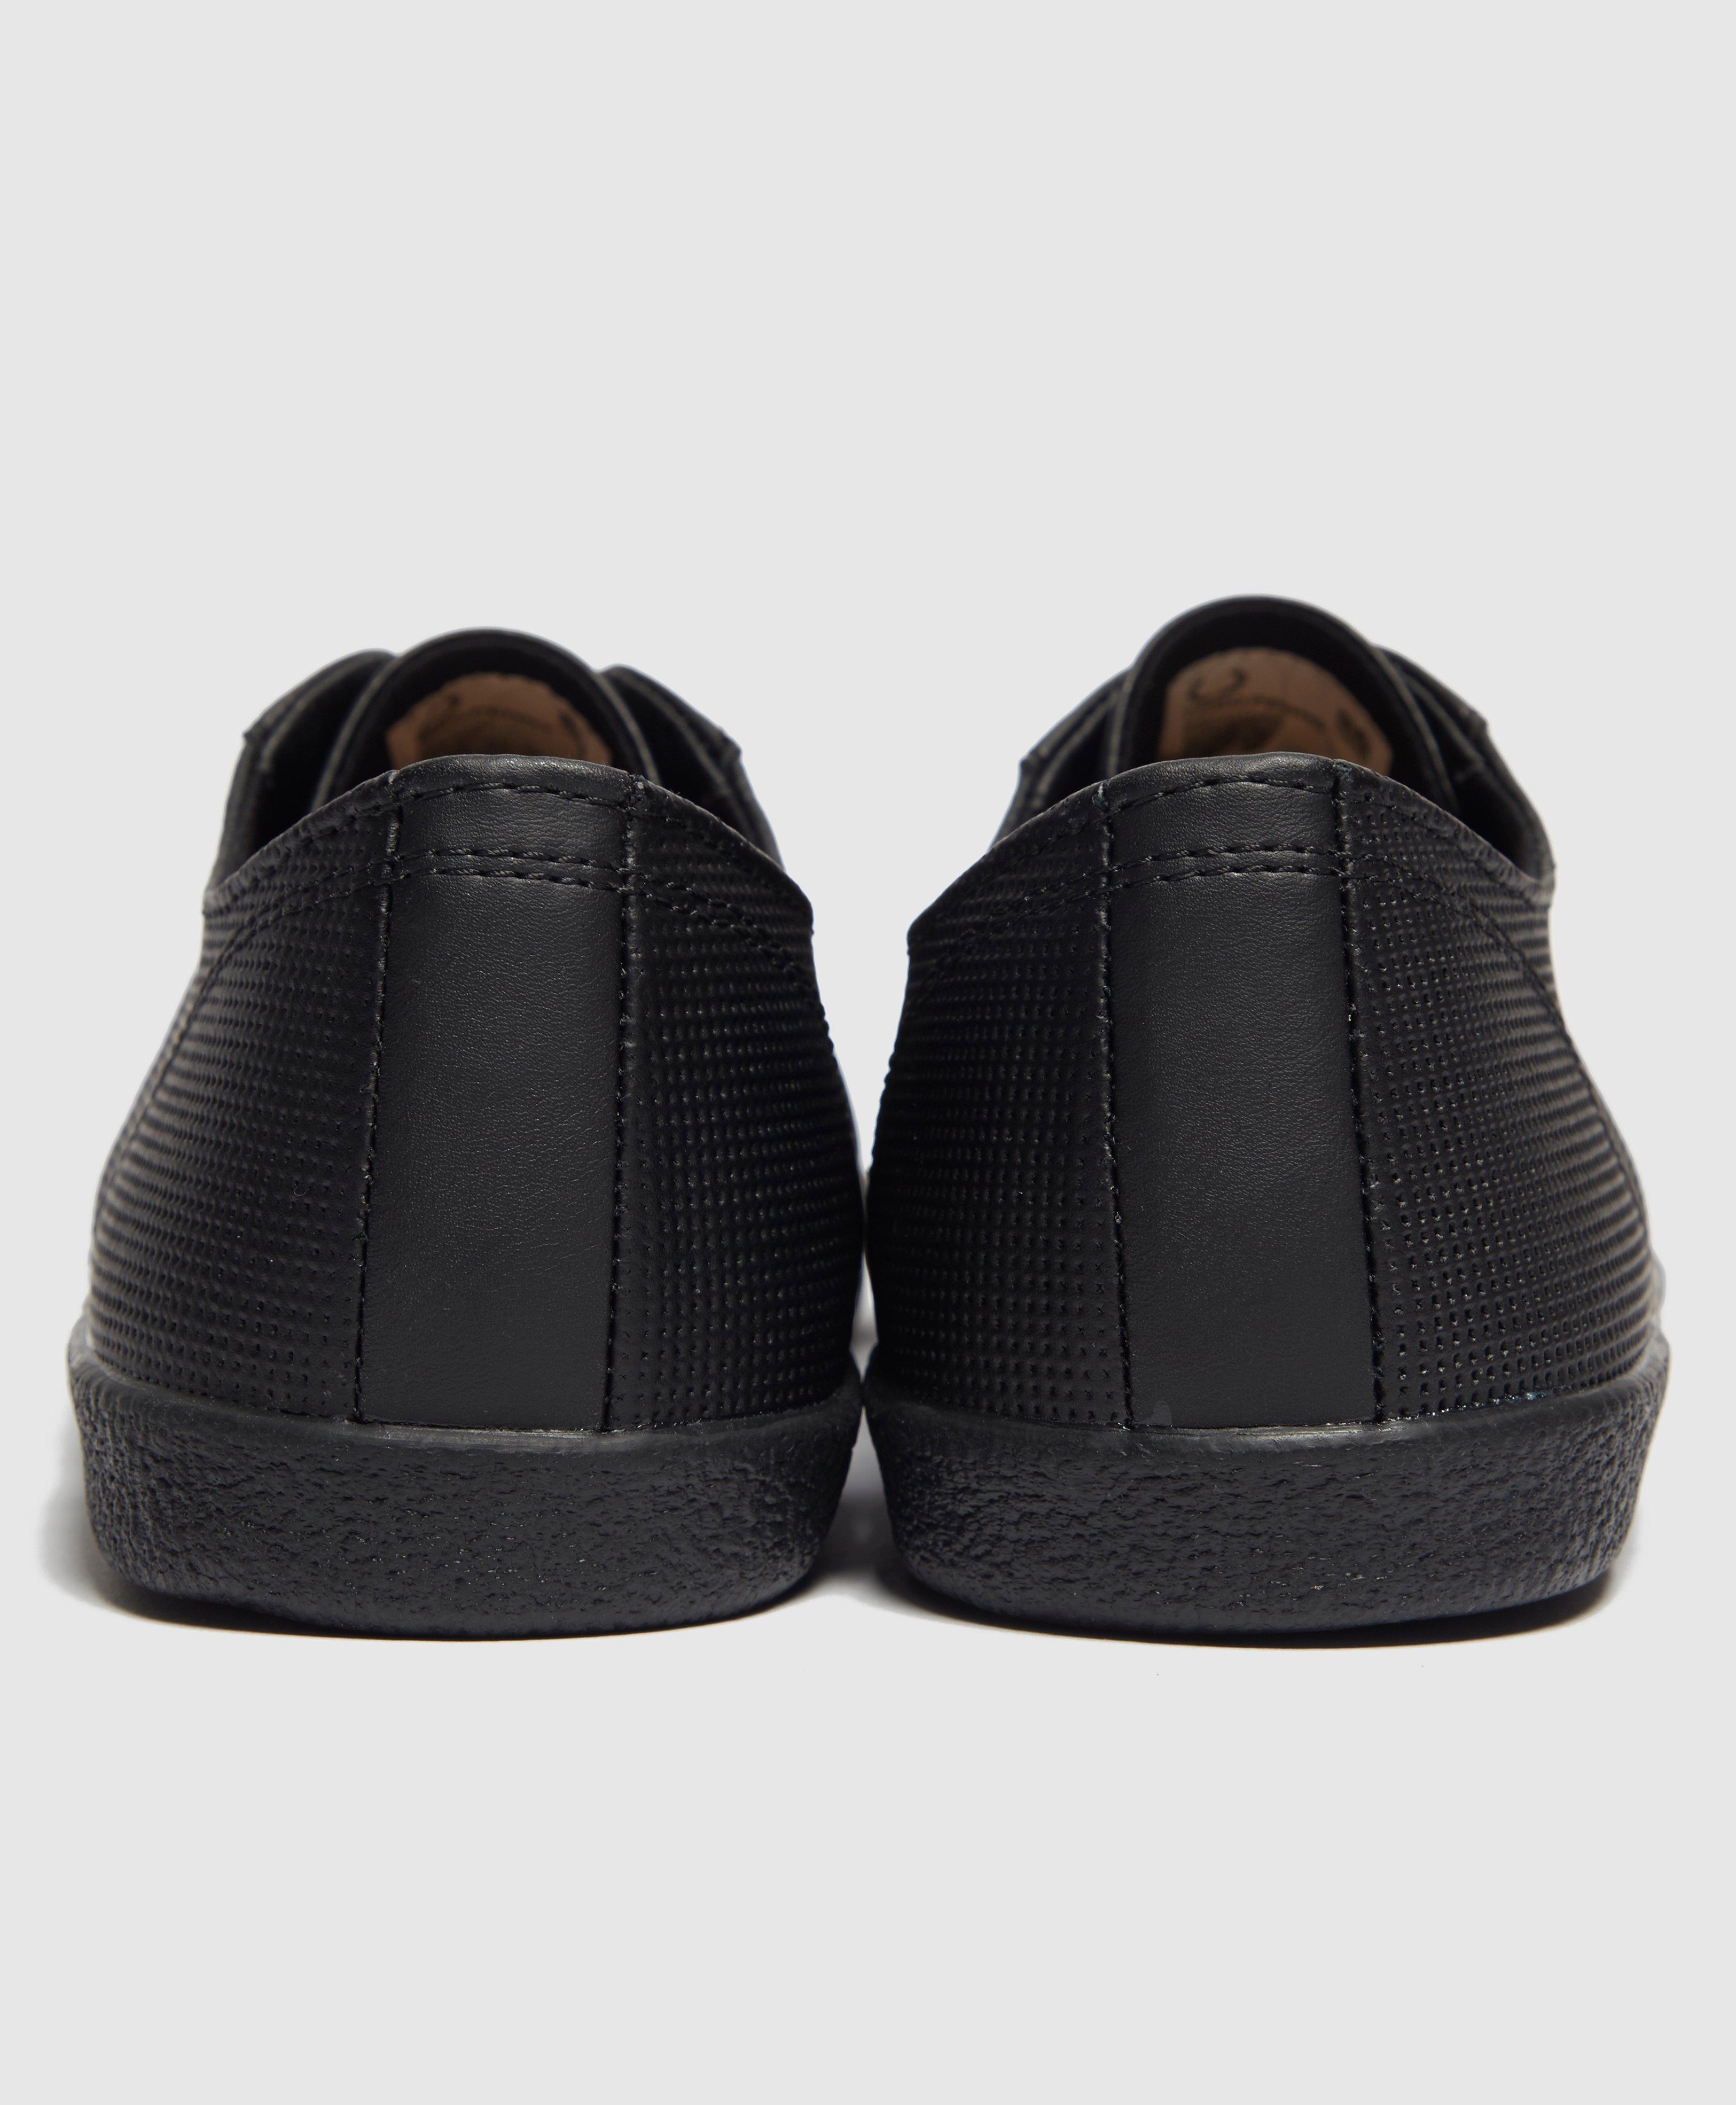 Fred Perry X Miles Kane Leather Trainers in Black for Men - Lyst